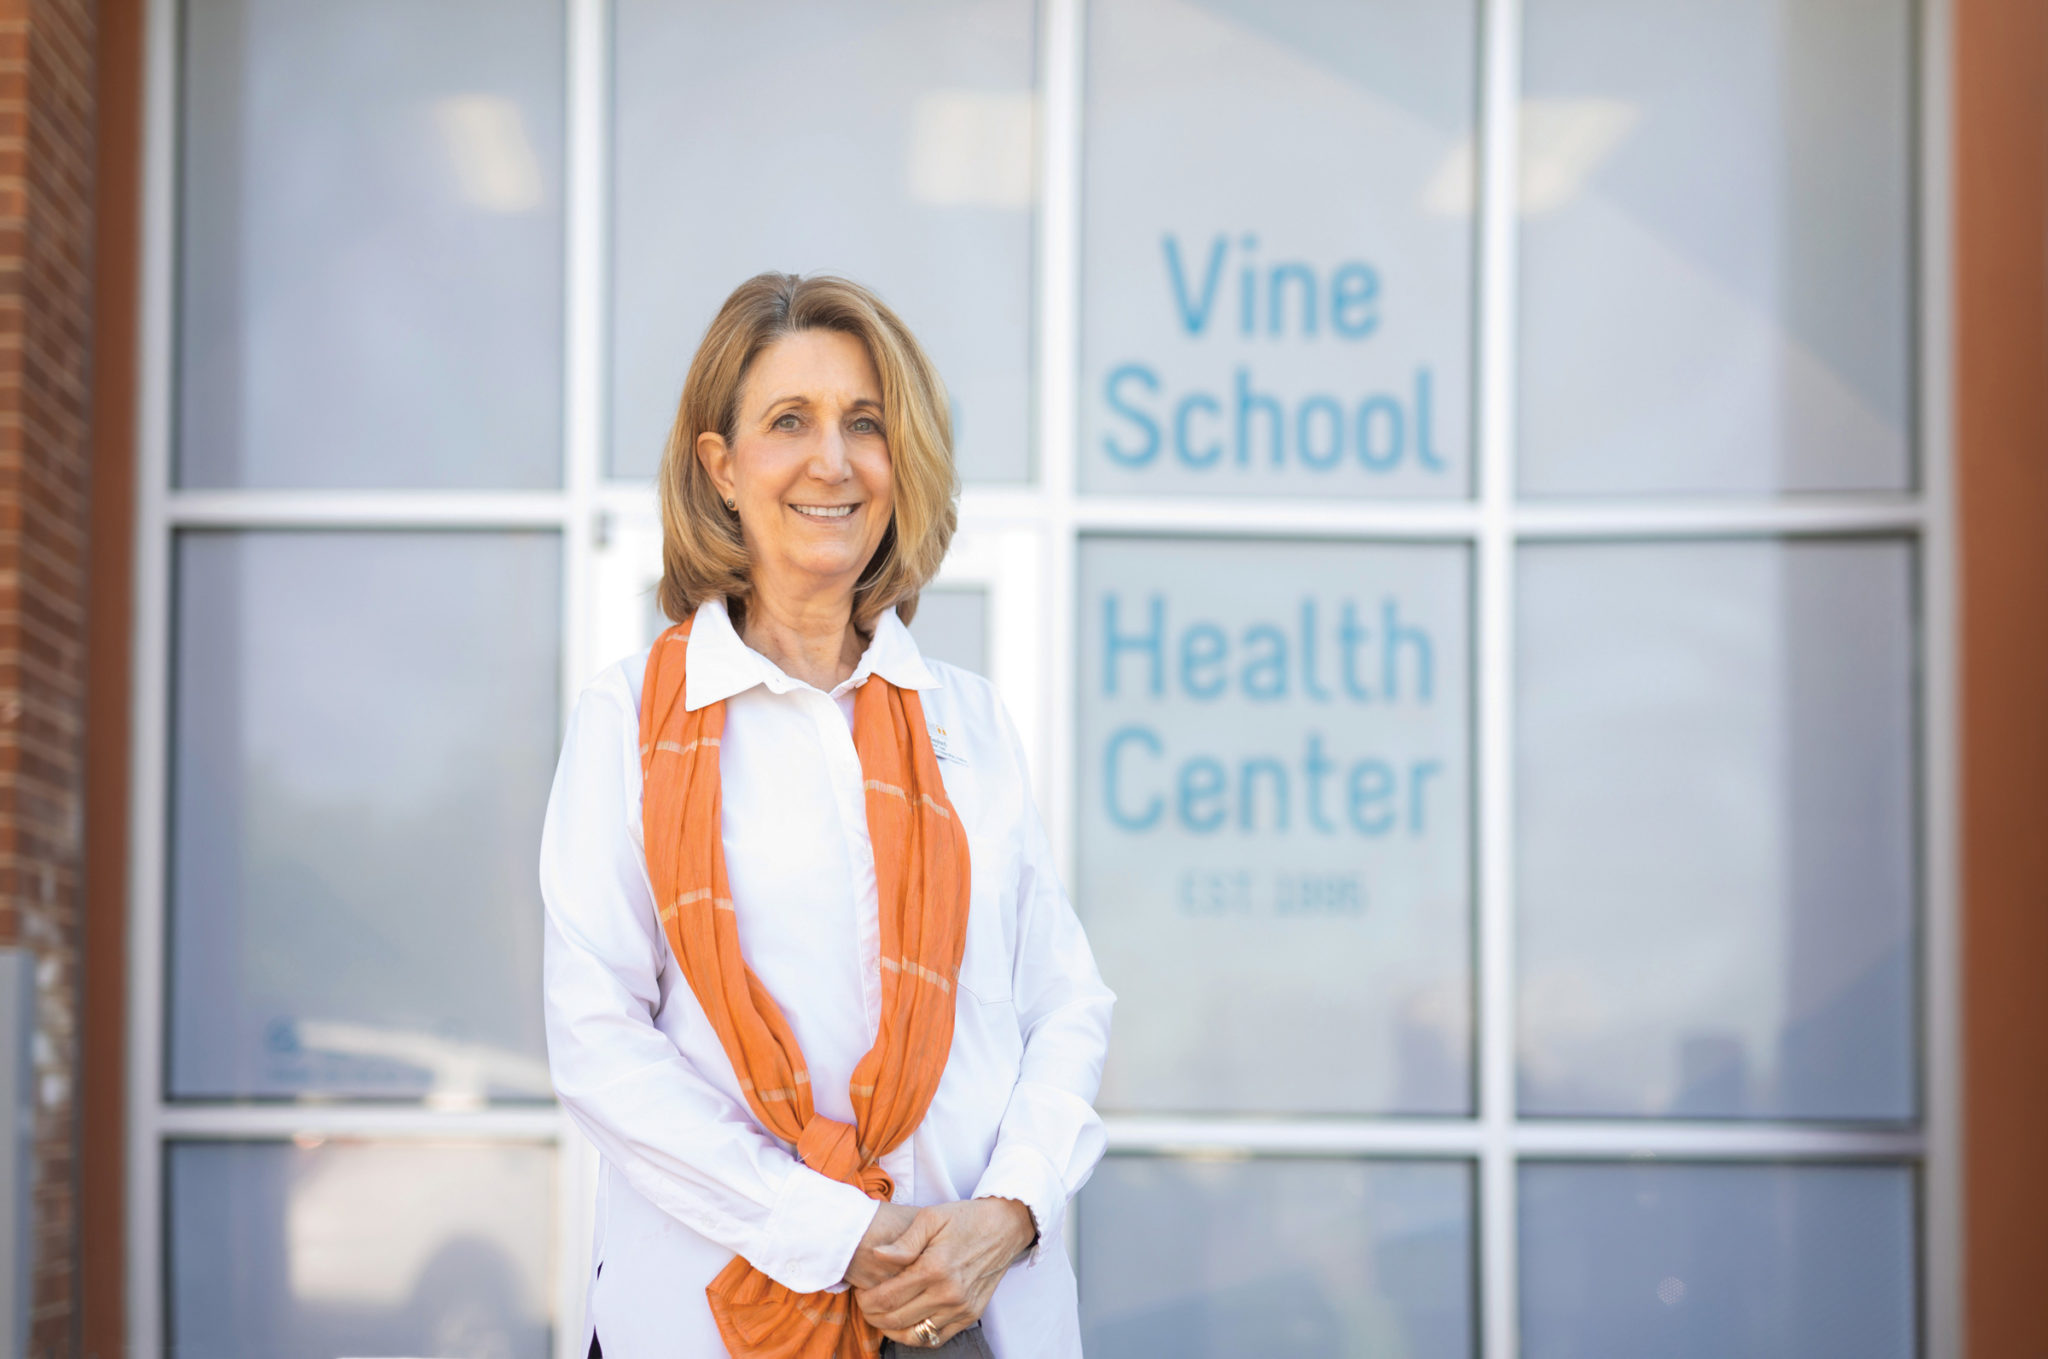 A middle aged woman stands outside the entrance to the Vine School Health Center